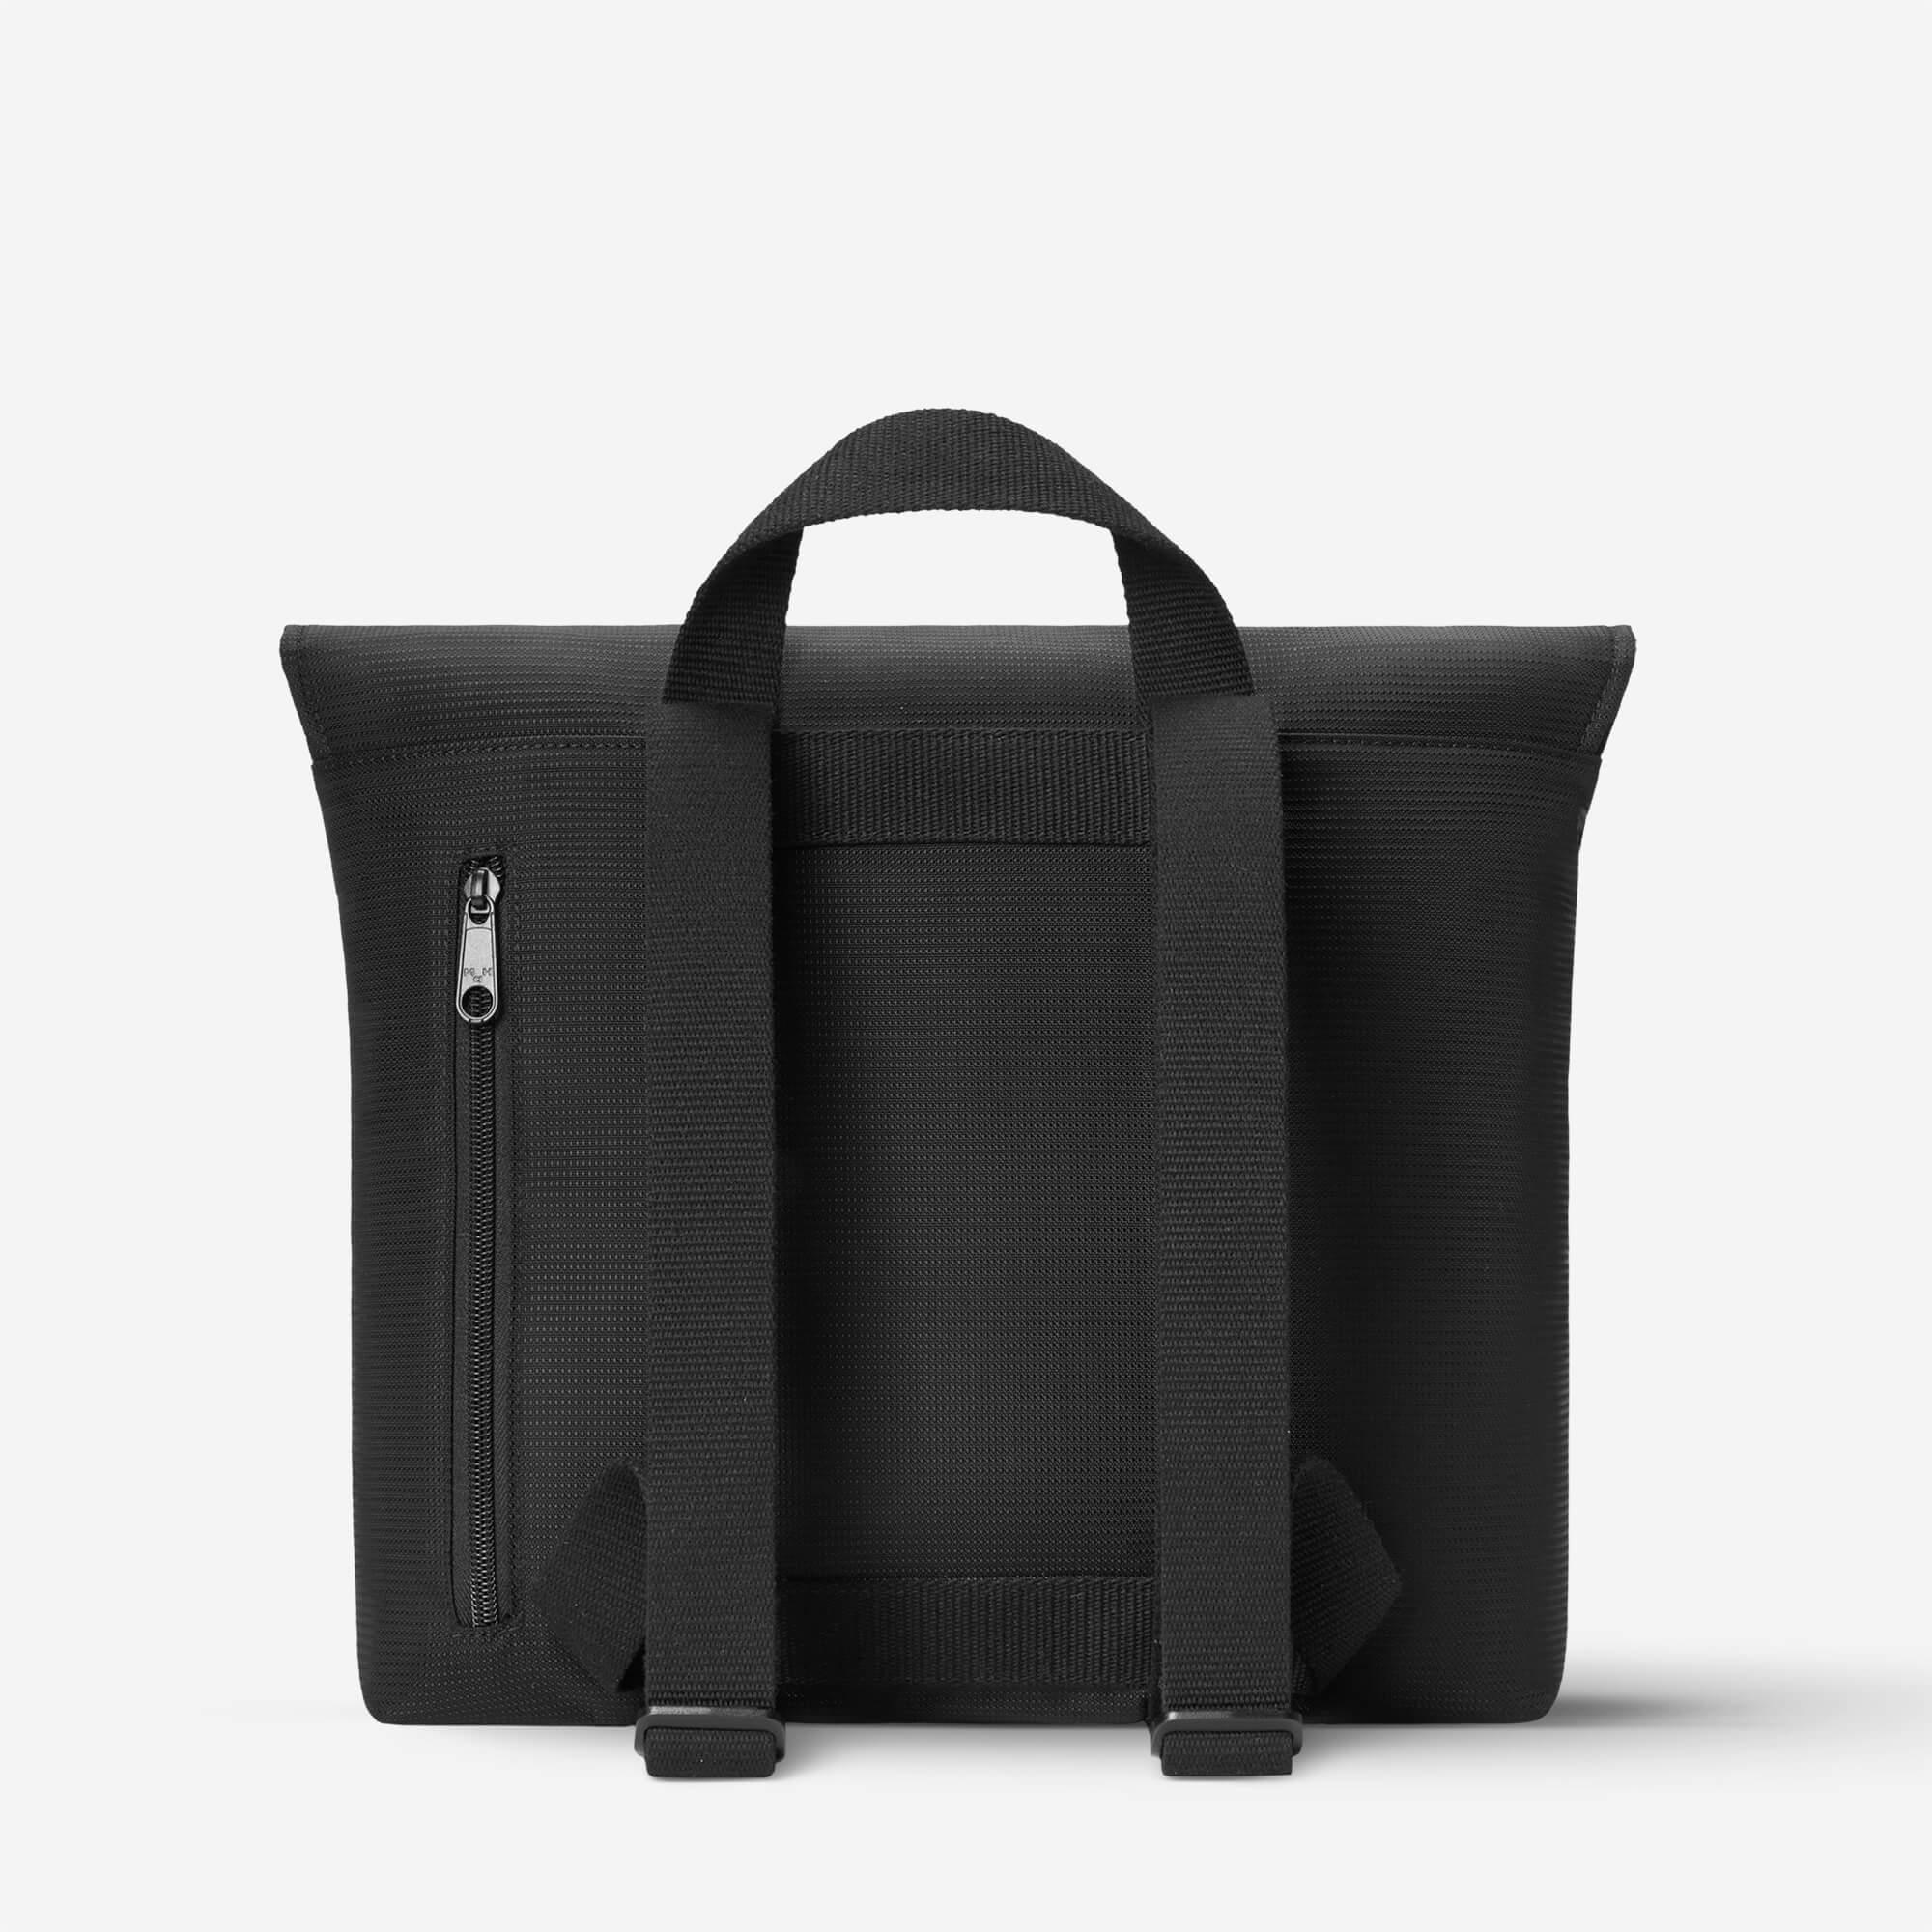 Minimalist School Backpack For Boys and Girls